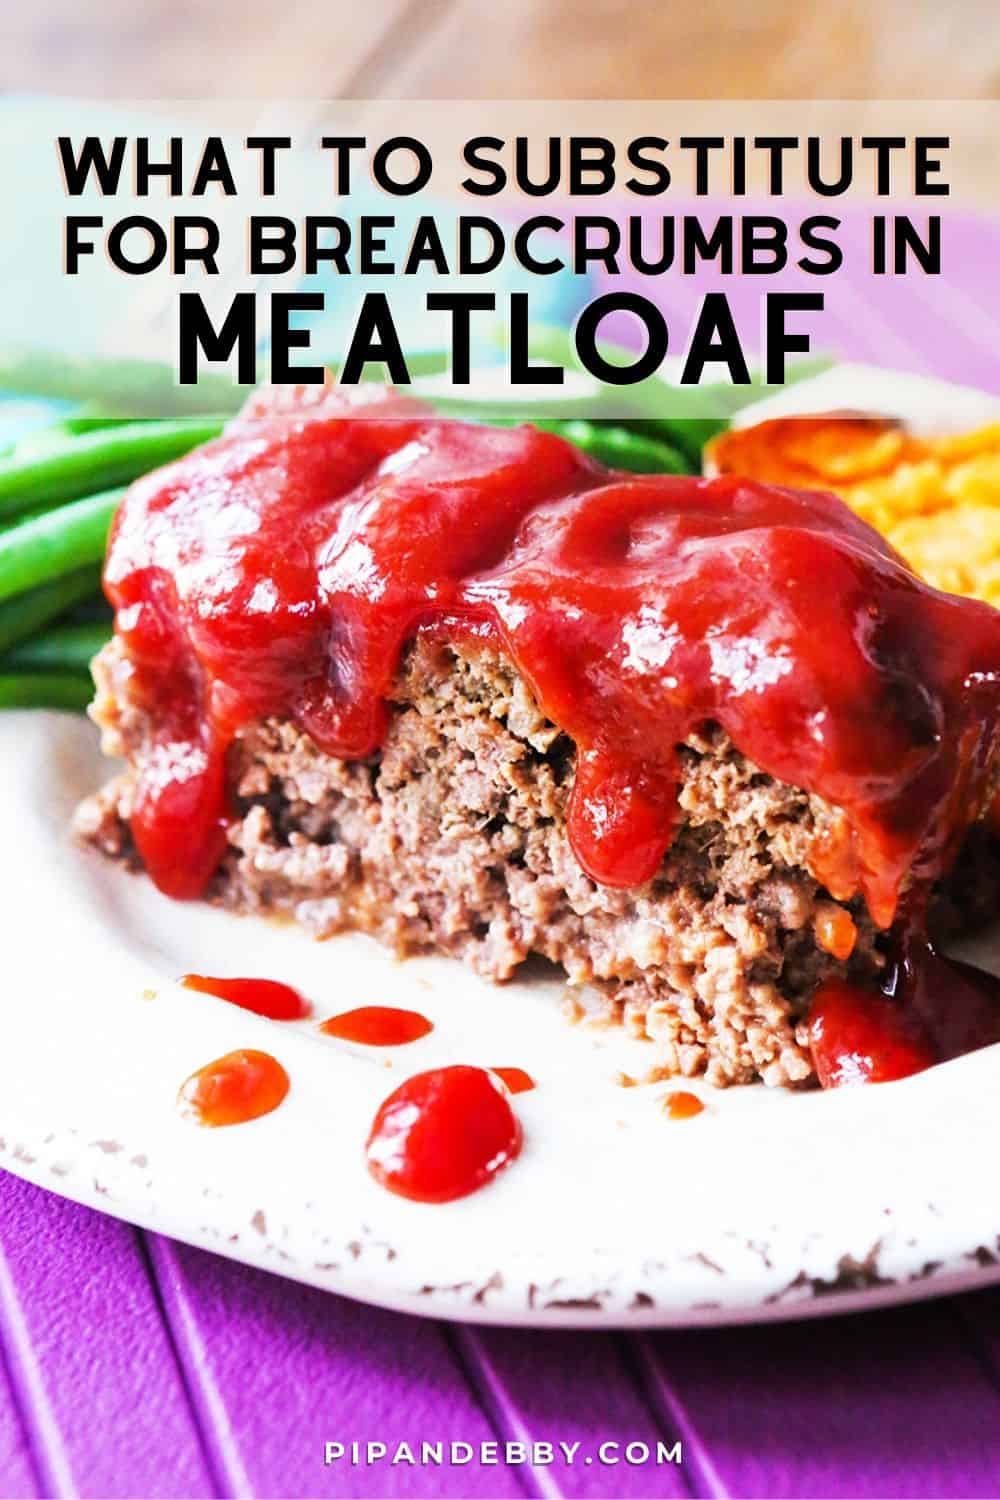 Photo of a piece of meatloaf with text overlay reading, "What to substitute for breadcrumbs in meatloaf."